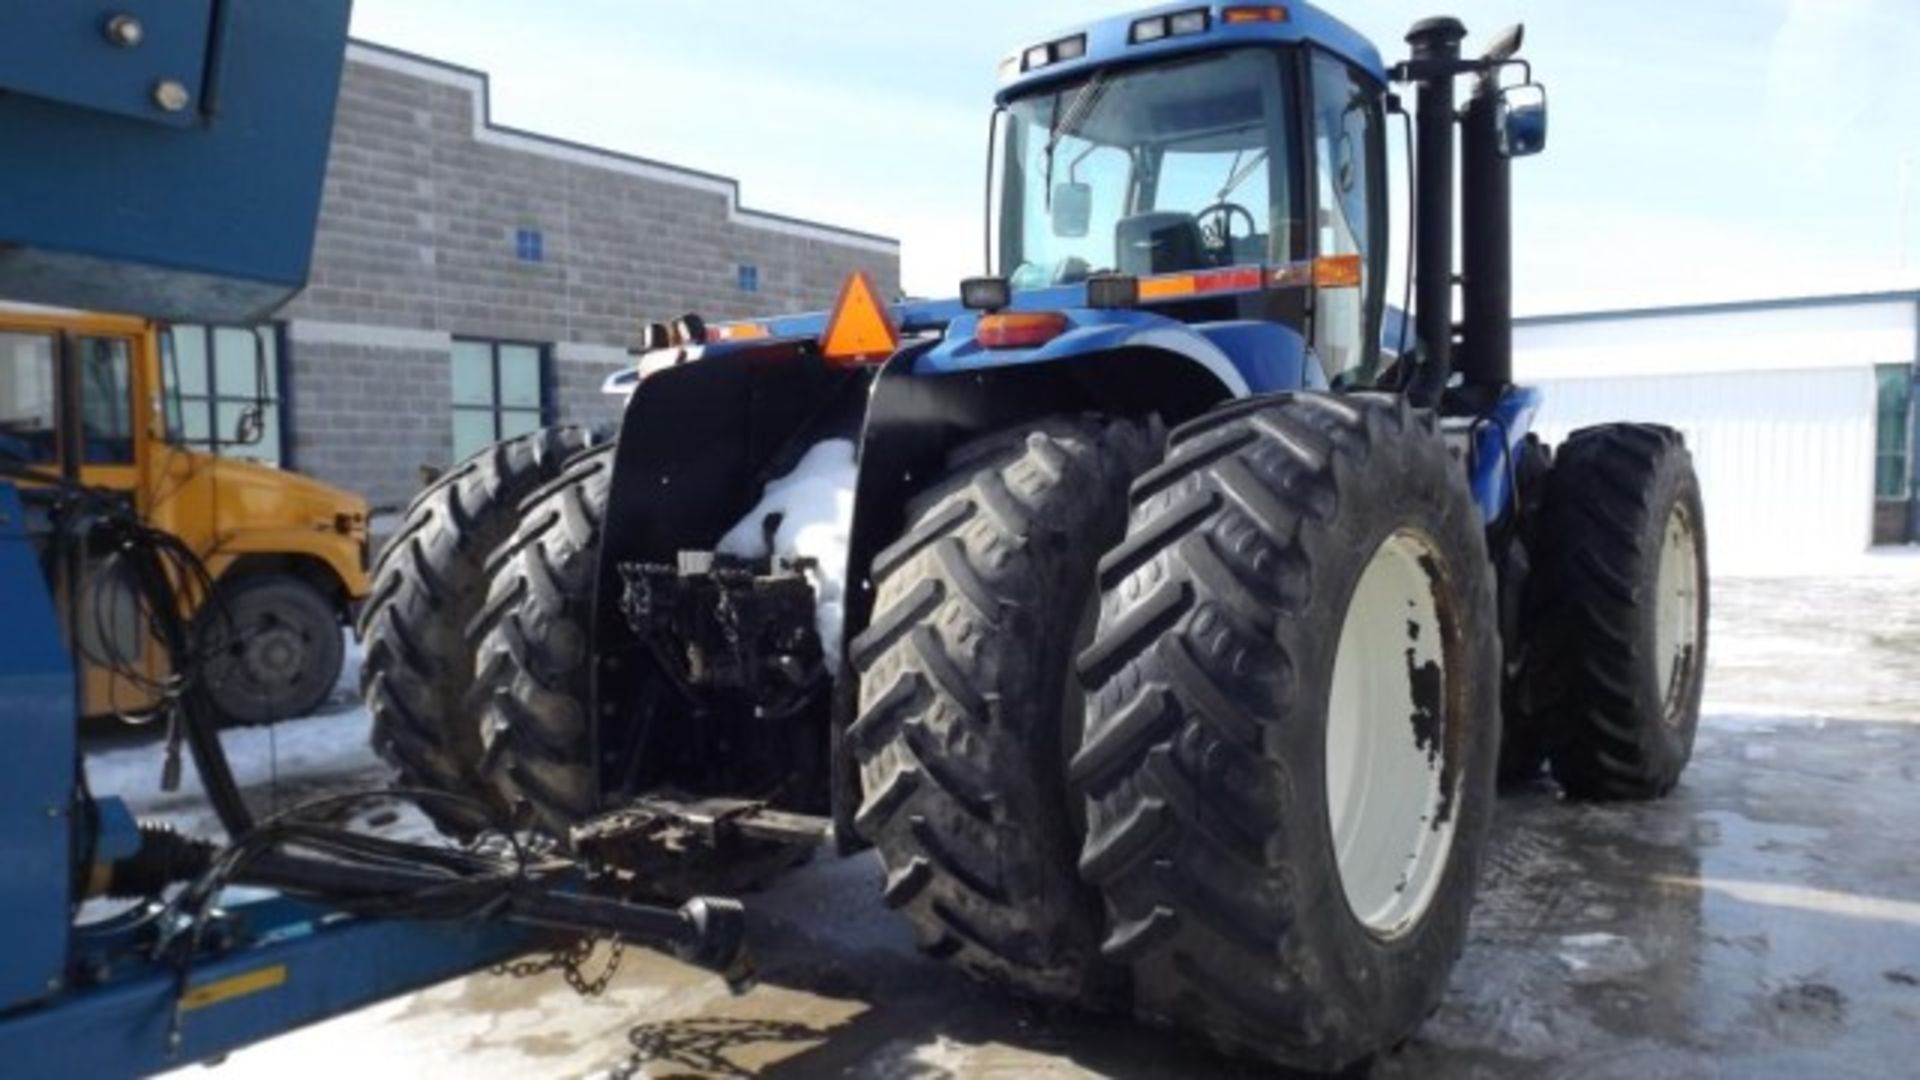 New Holland TJ375 Tractor '03, sn# RVS002016 7683 Hrs, 4WD, Fully Equipped Cab, 375 HP, 16/2 PS, - Image 3 of 24